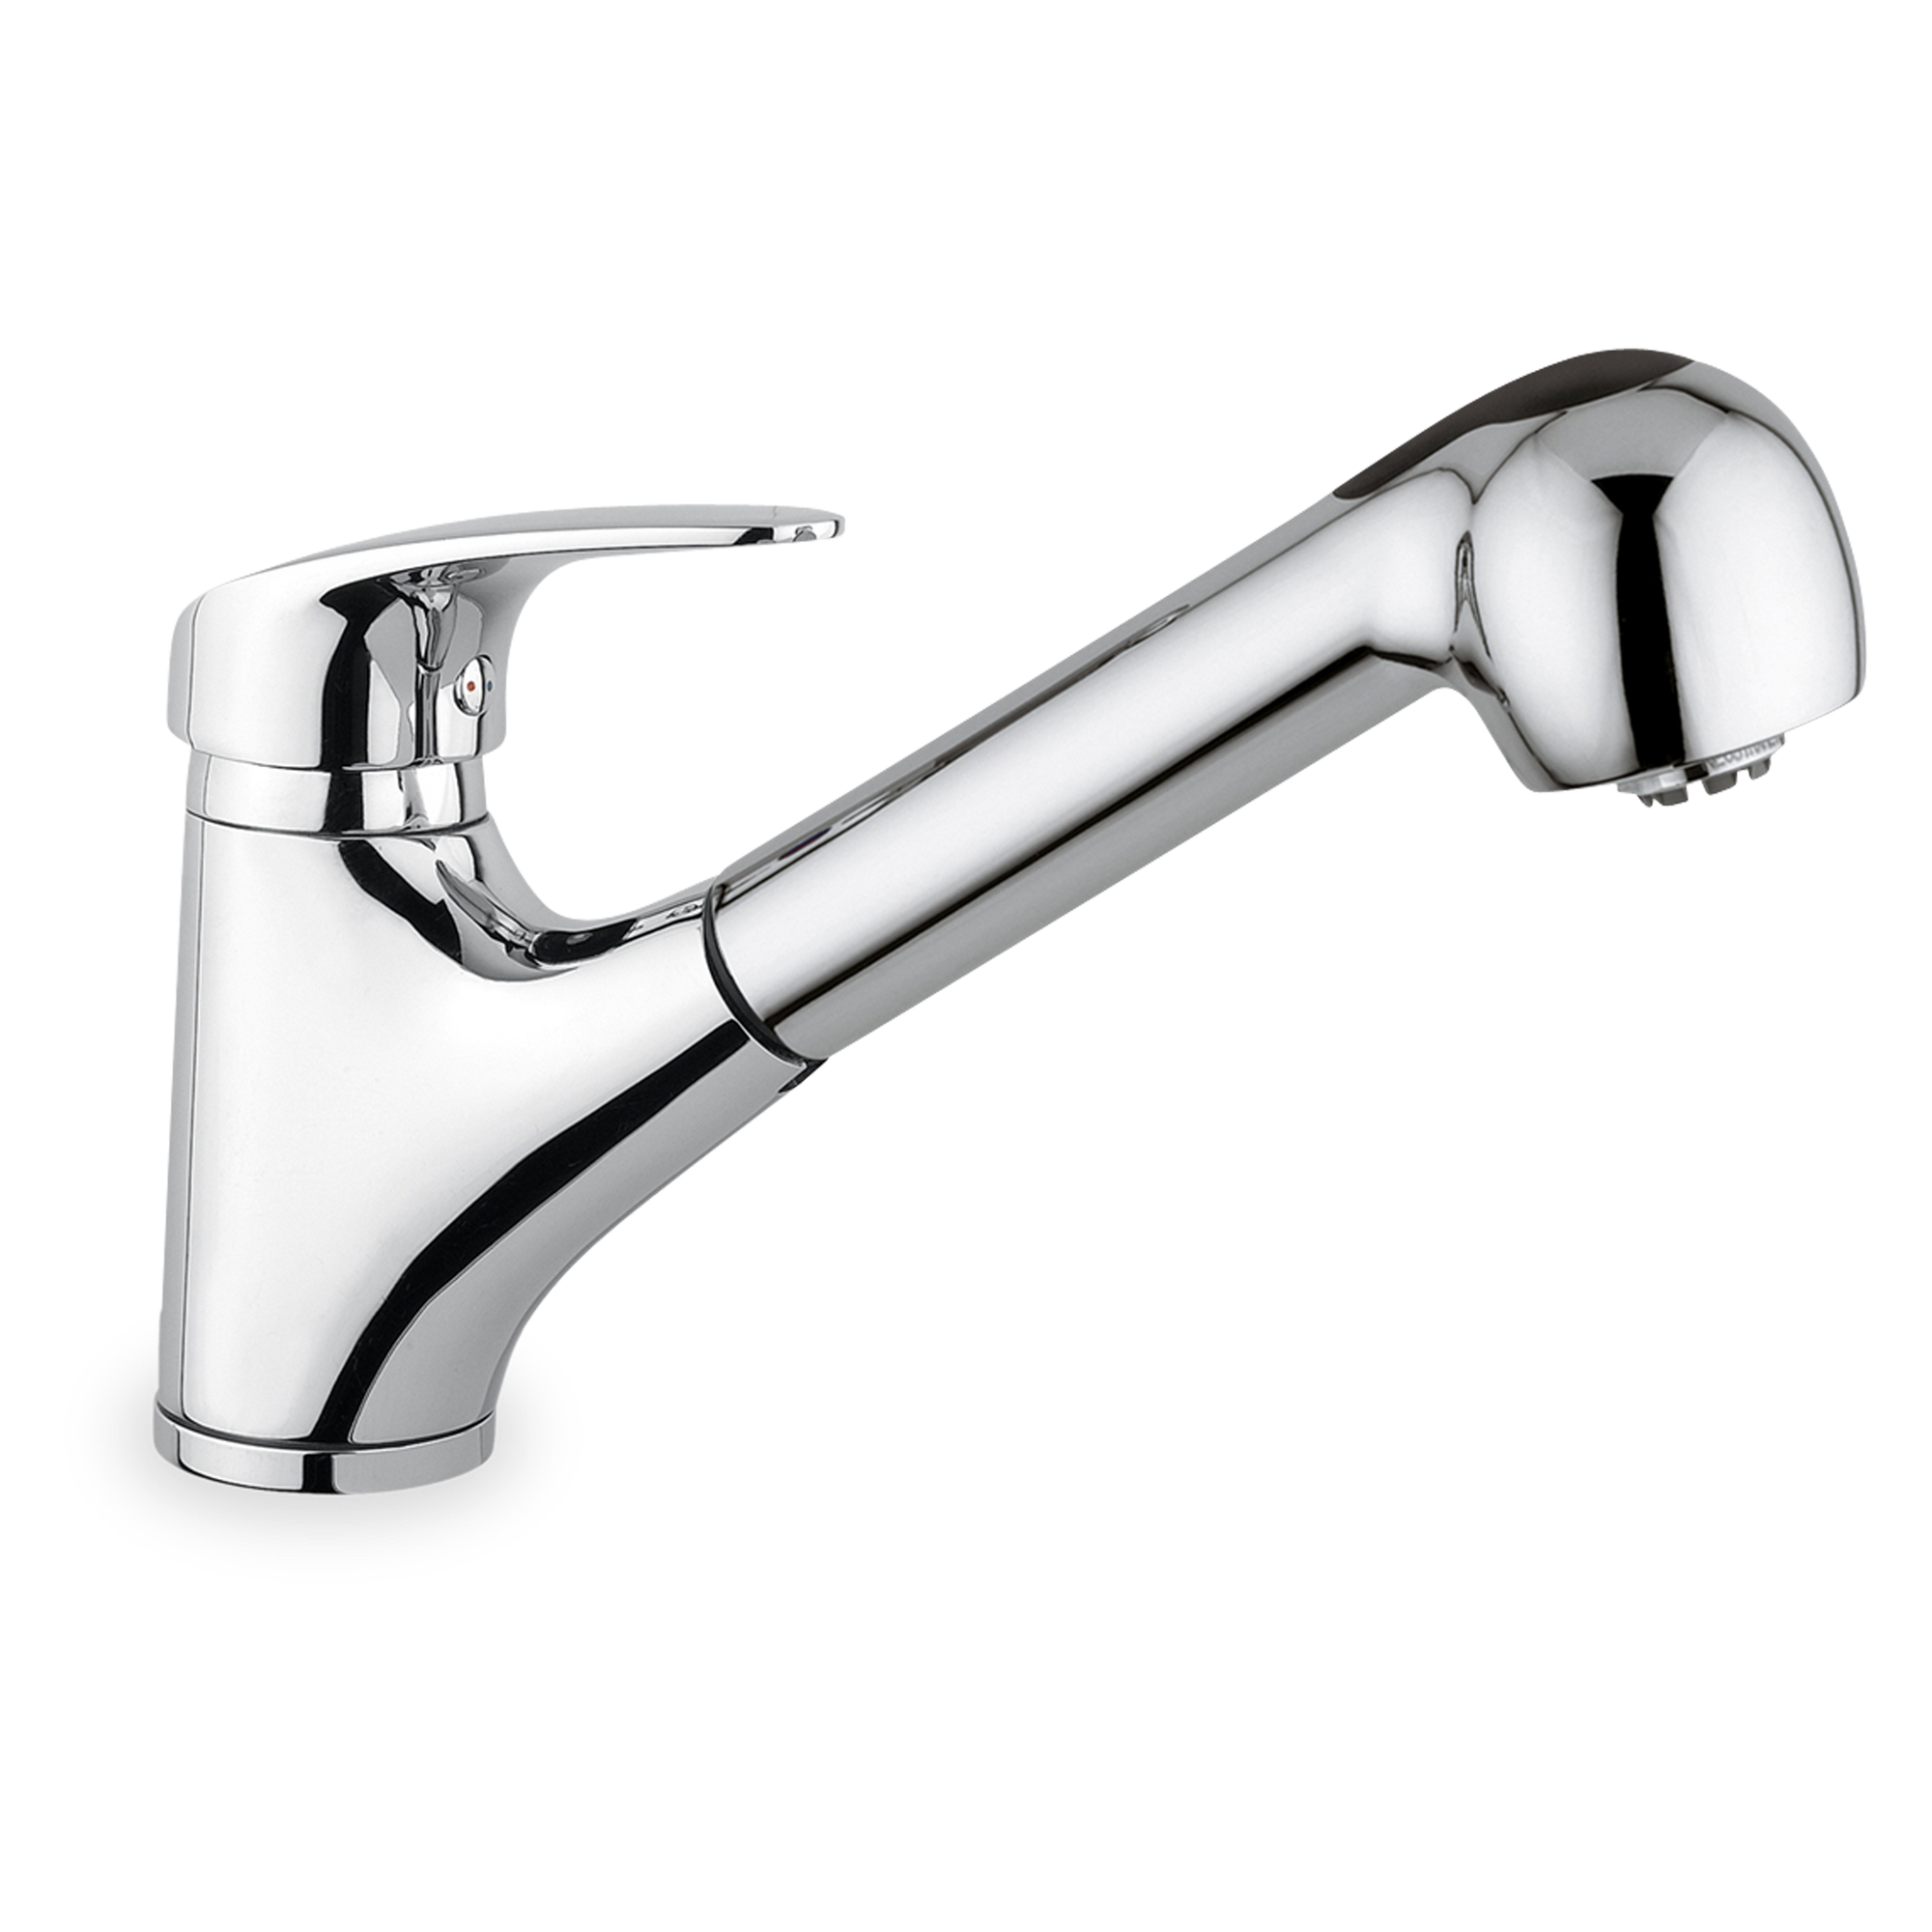 The Otis pull-out faucet is a seamless, contemporary, single-lever faucet.